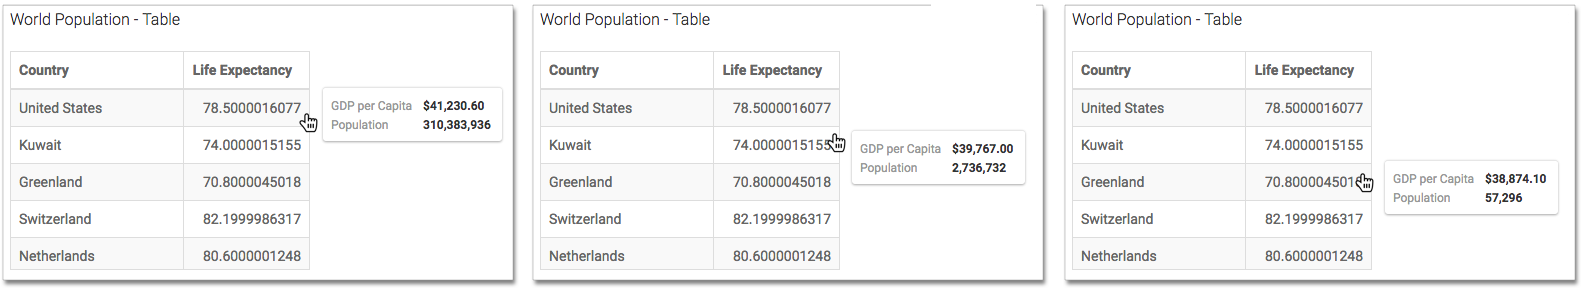 Sorting tables by fields on the Tooltip shelf, descending by GDP